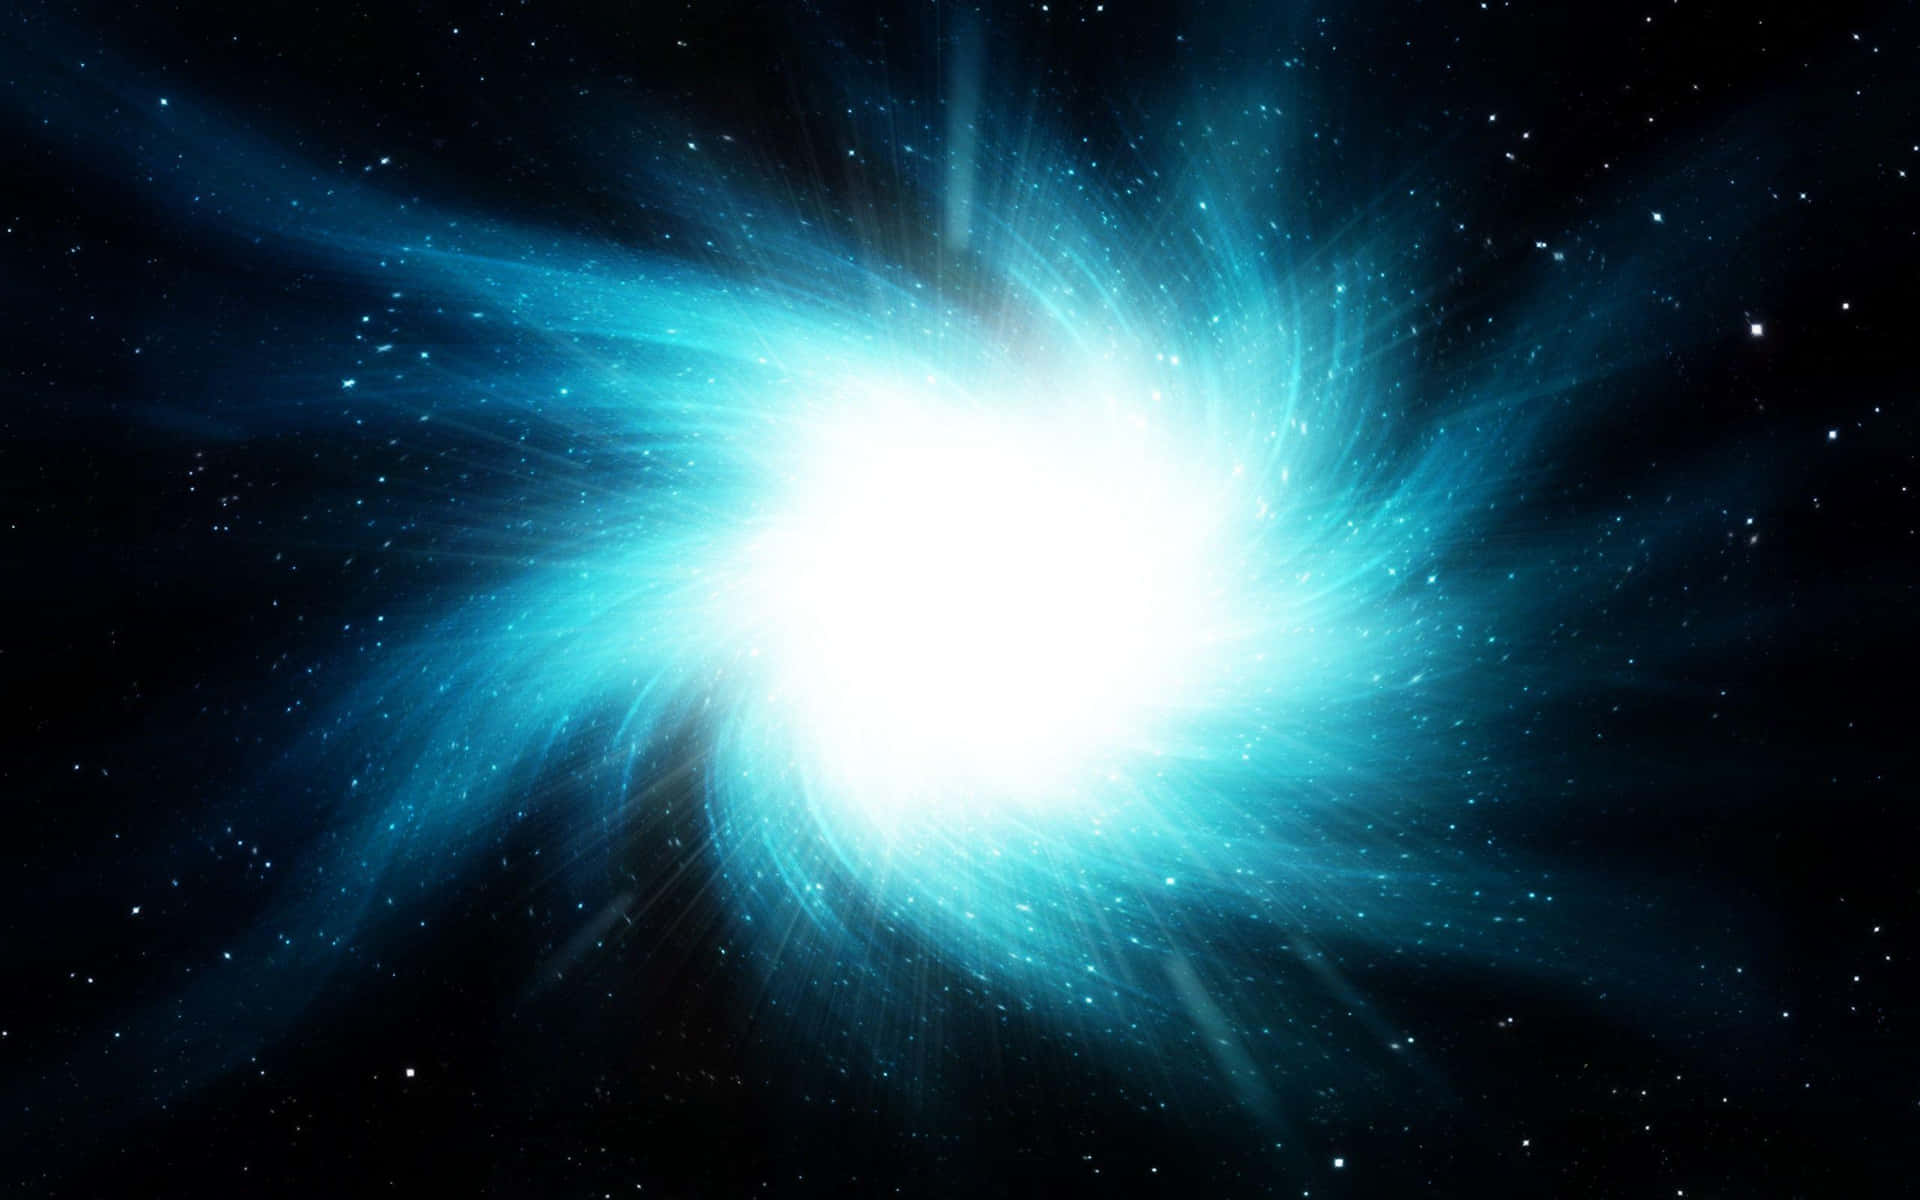 A Blue Star Burst In Space